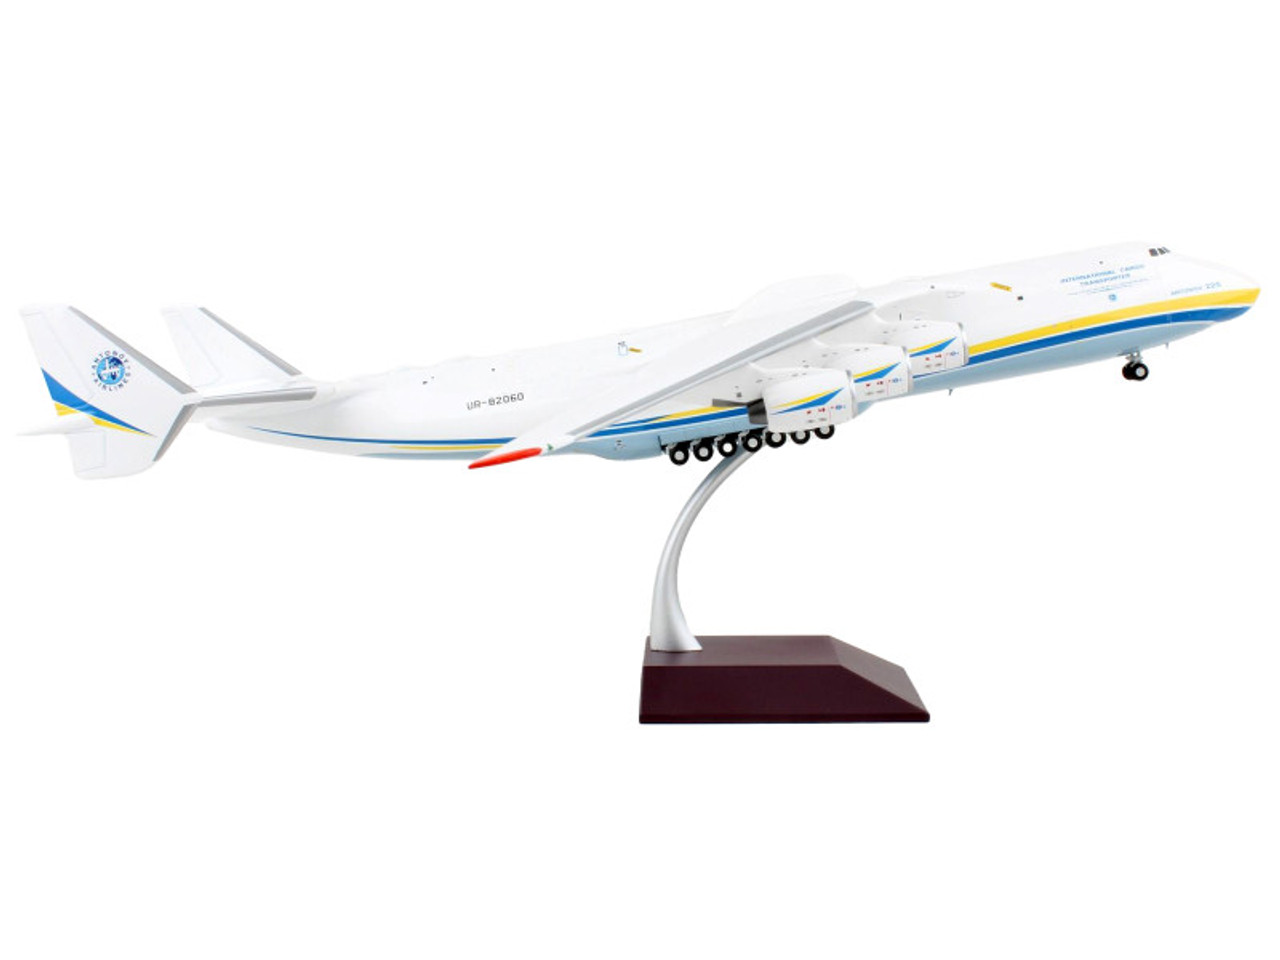 Antonov AN225 Mriya Commercial Aircraft "Antonov Airlines" White with Blue and Yellow Stripes "Gemini 200" Series 1/200 Diecast Model Airplane by GeminiJets